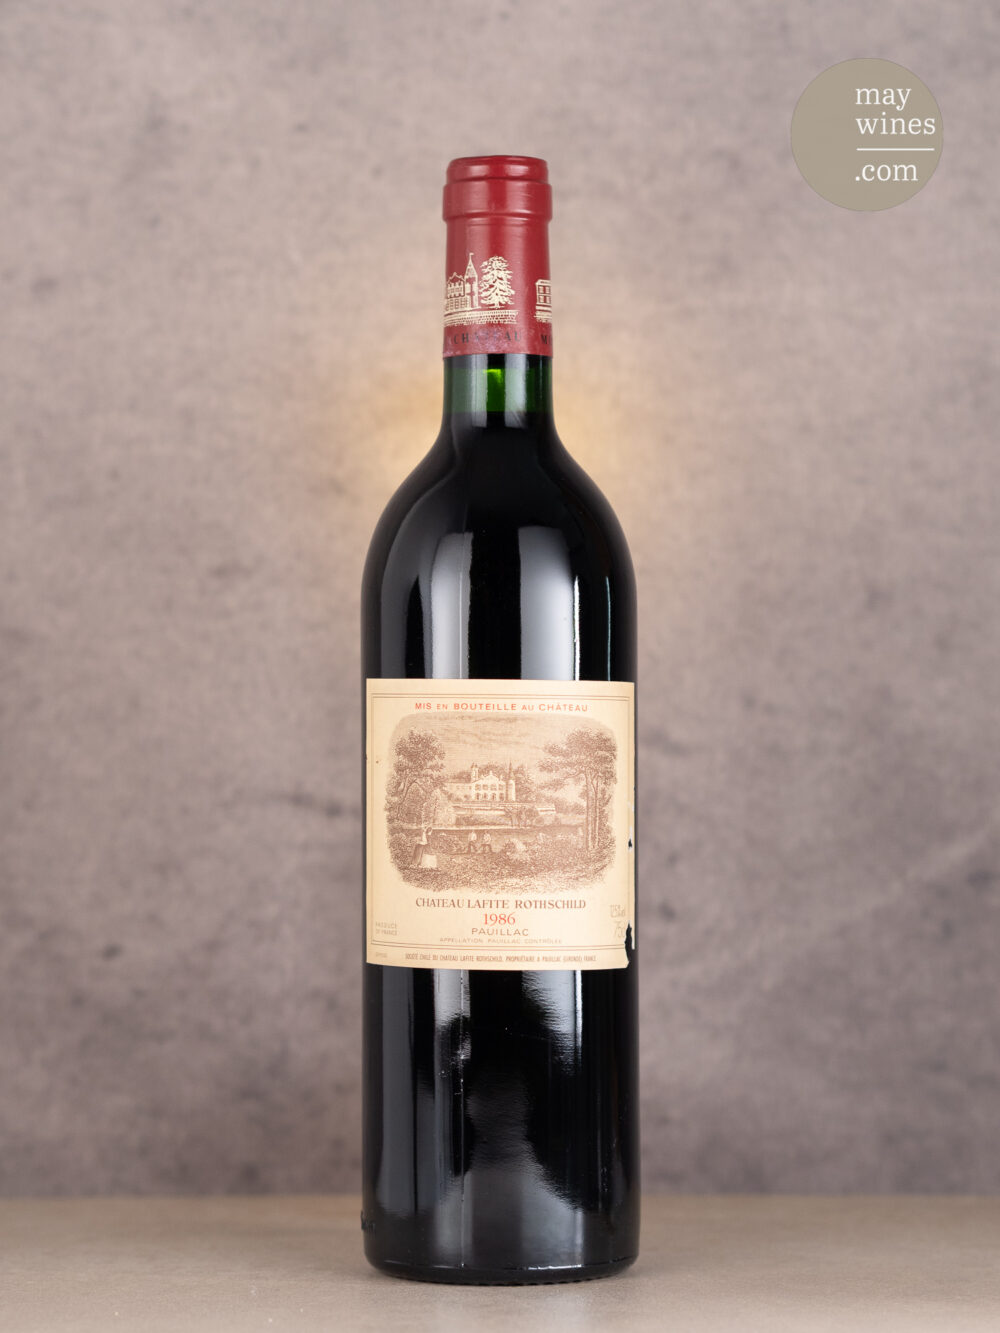 May Wines – Rotwein – 1986 Château Lafite Rothschild